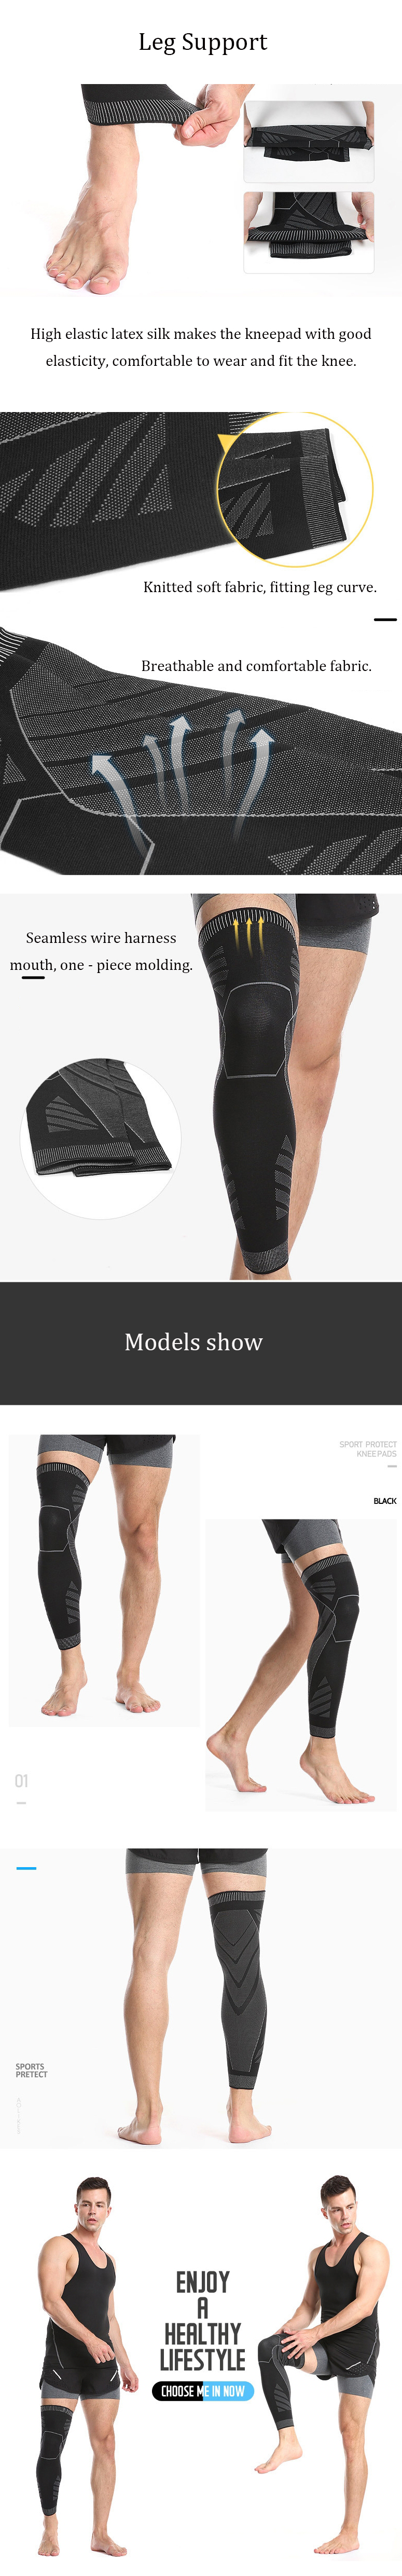 AOLIKES-1PC-Sports-Elastic-Leg-Support-Knee-Pad-Foot-Knee-Brace-Cycling-Basketball-Fitness-Protectiv-1566097-1